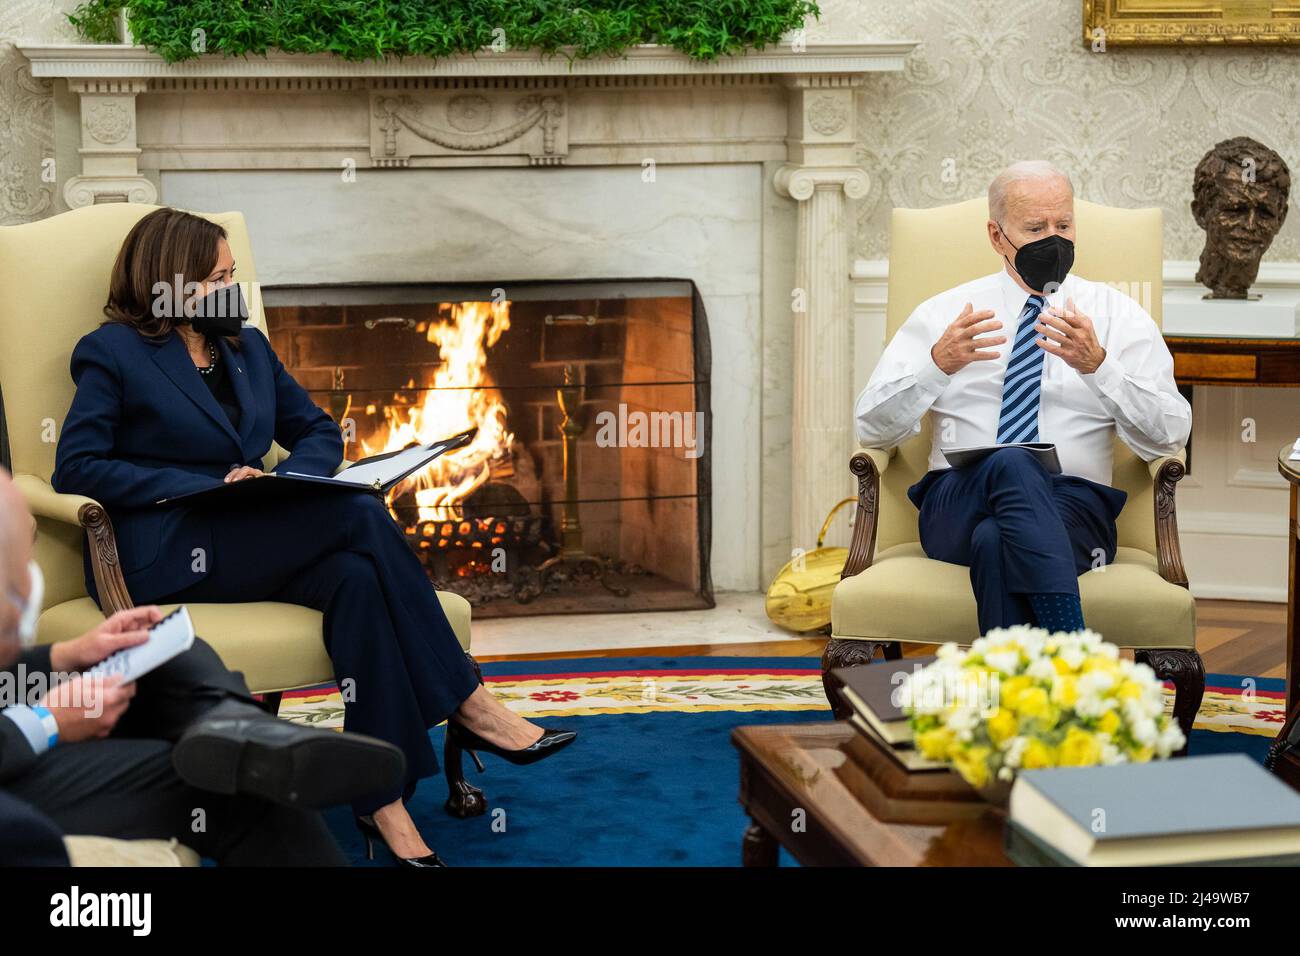 President Joe Biden and Vice President Kamala Harris meet with cabinet members and staff for a report of the Task Force on Worker Organizing and Empowerment, Friday, February 4, 2022, in the Oval Office of the White House. (Official White House Photo by Adam Schultz) Stock Photo